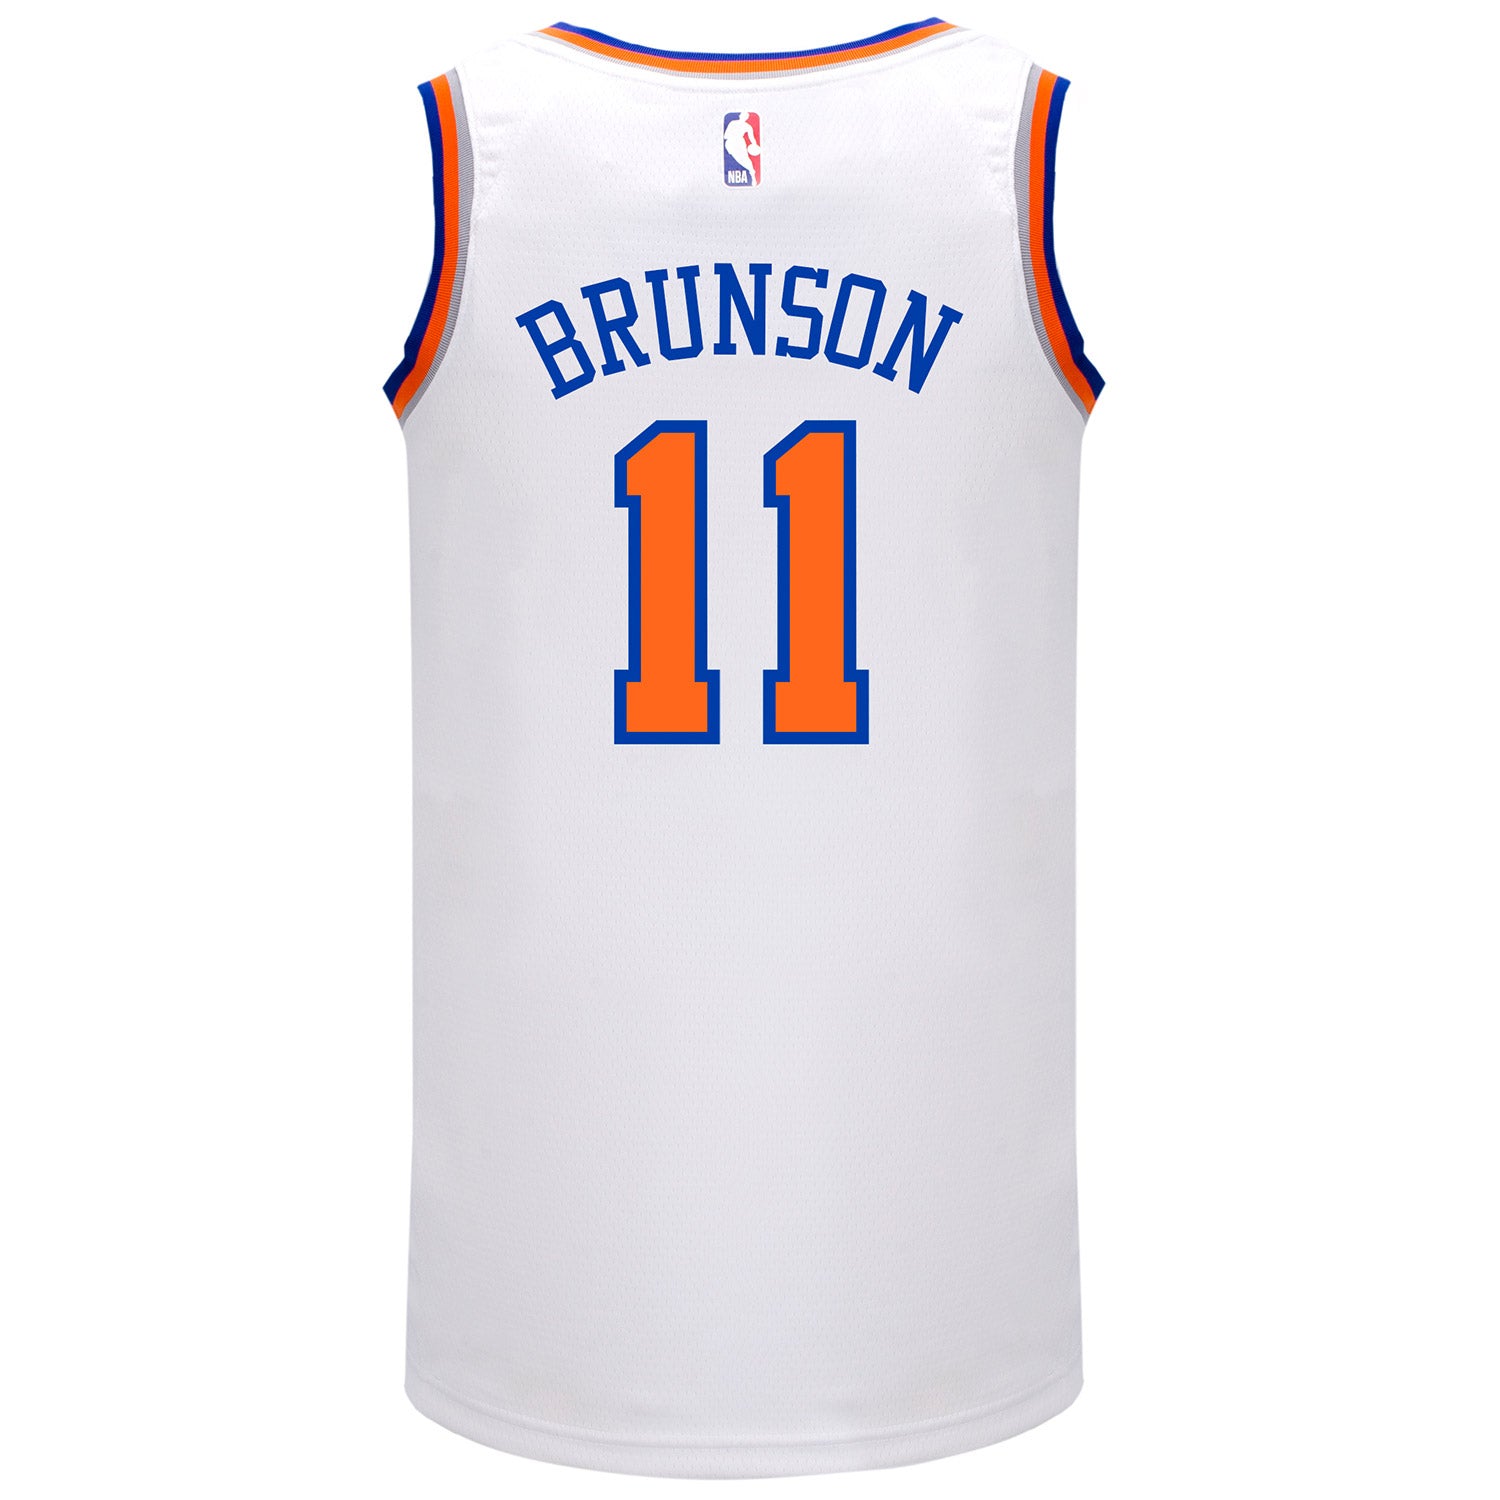 basketball jersey with white shirt